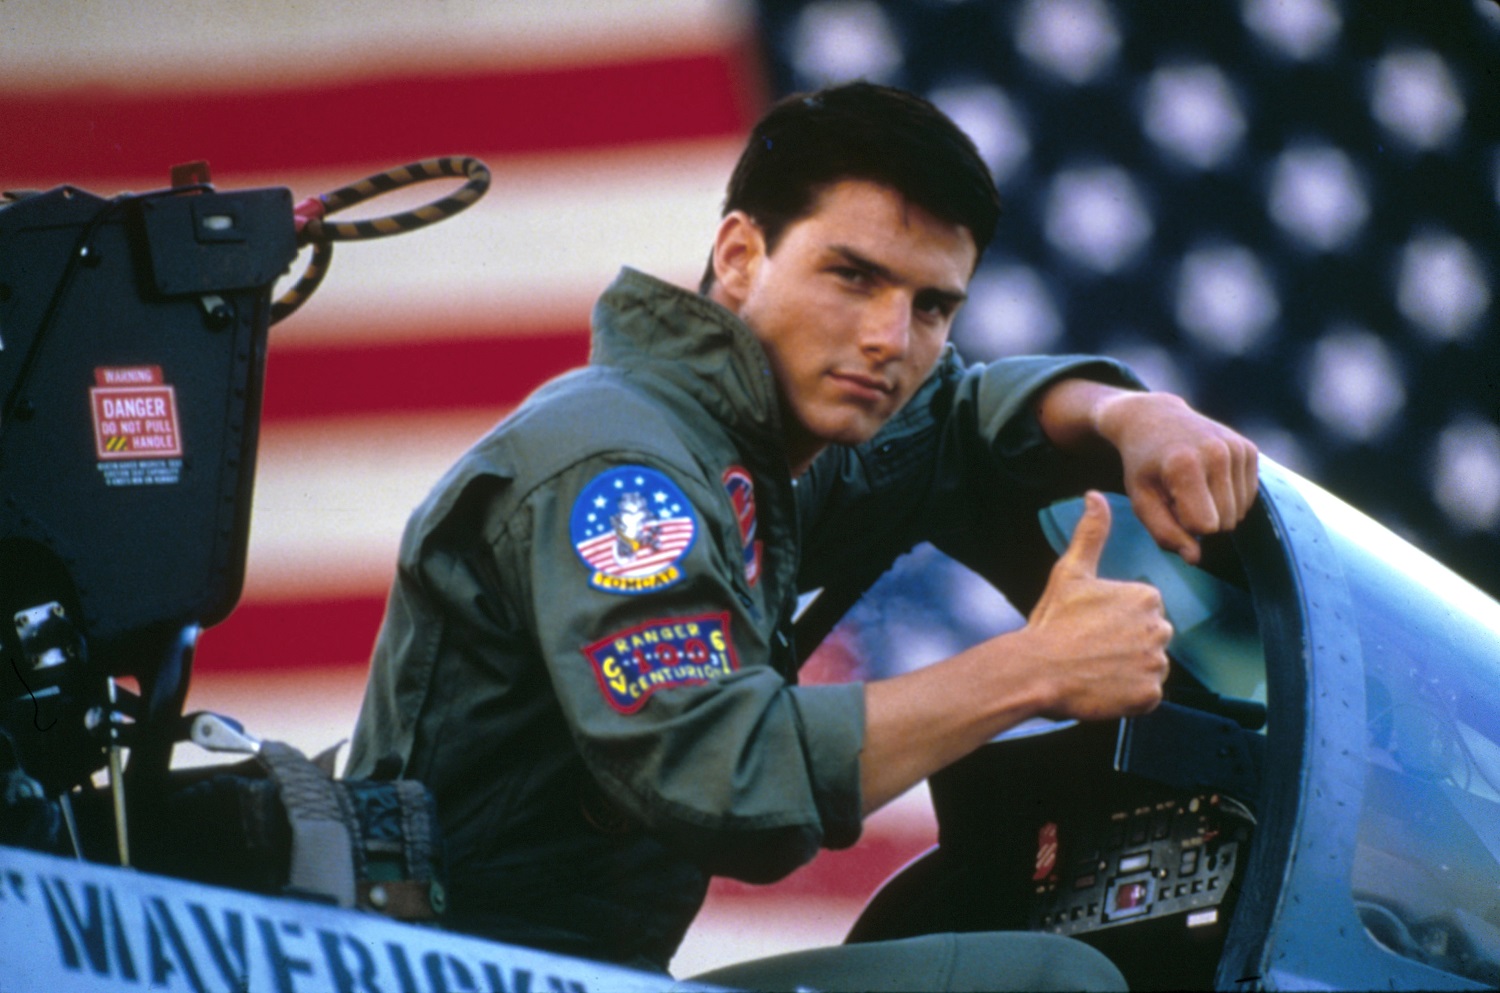 American actor Tom Cruise on the set of Top Gun, directed by Tony Scott. (Photo by Paramount Pictures/Sunset Boulevard/Corbis via Getty Images)